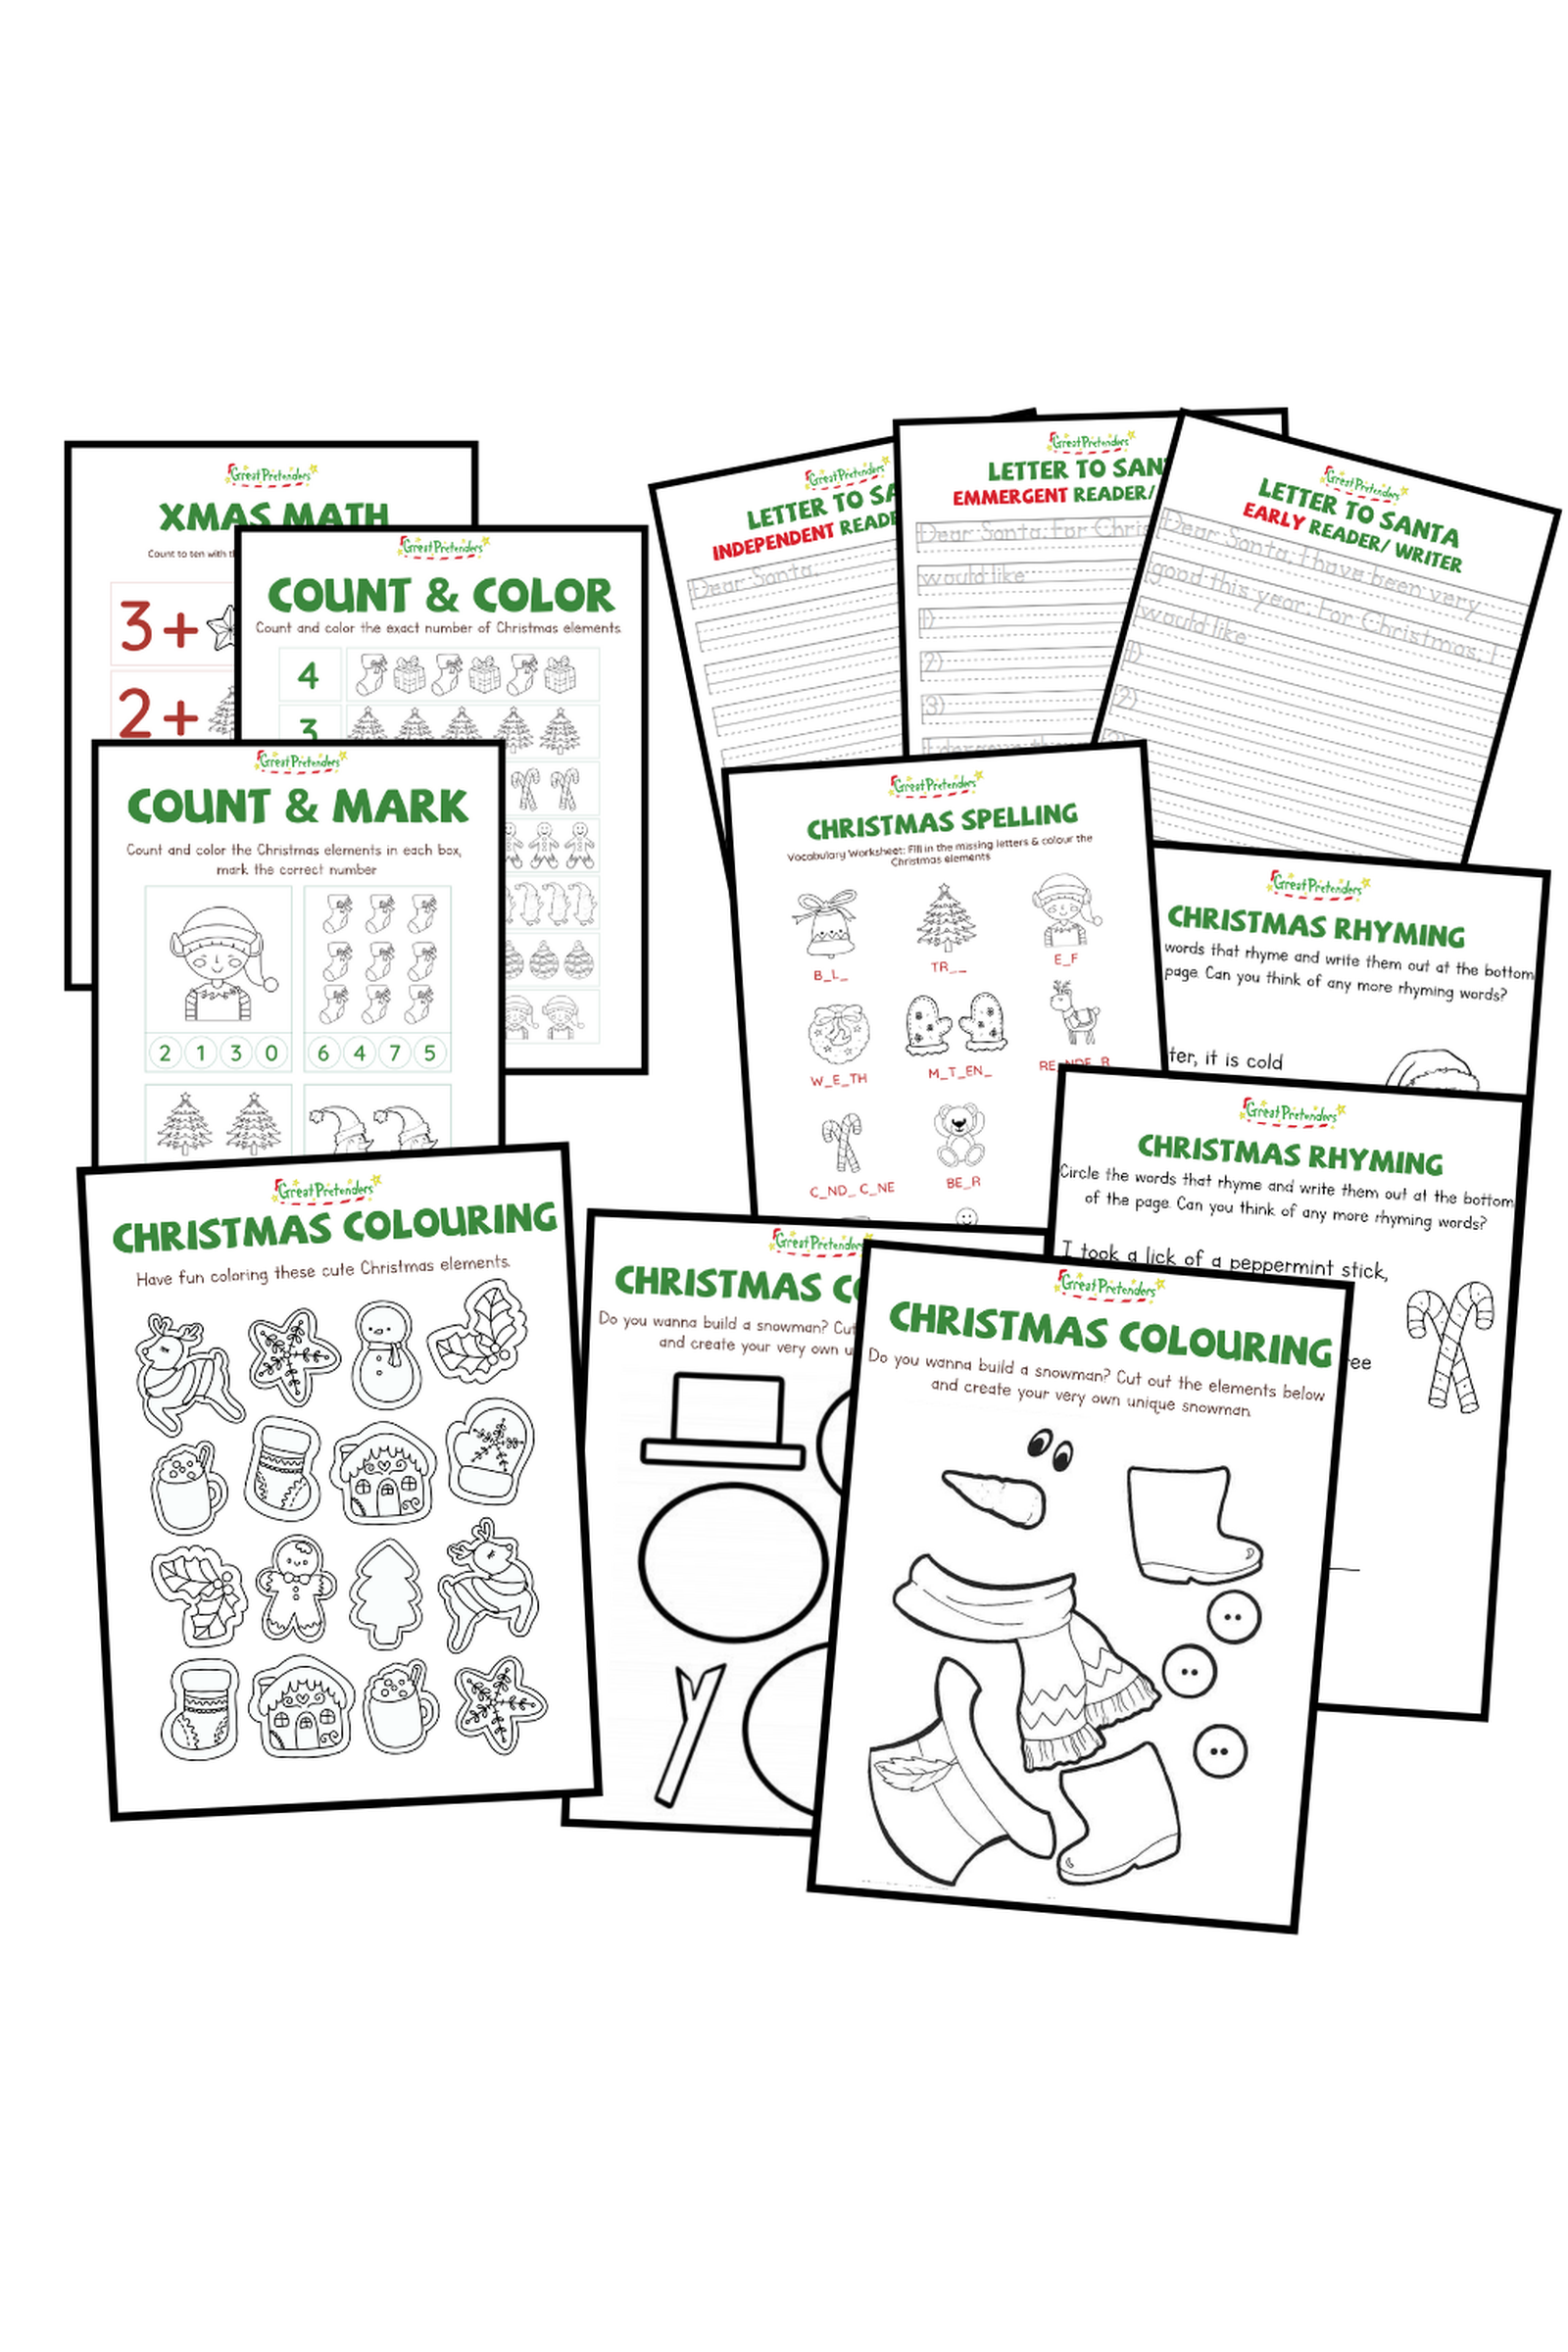 Holiday Themed Learning Materials